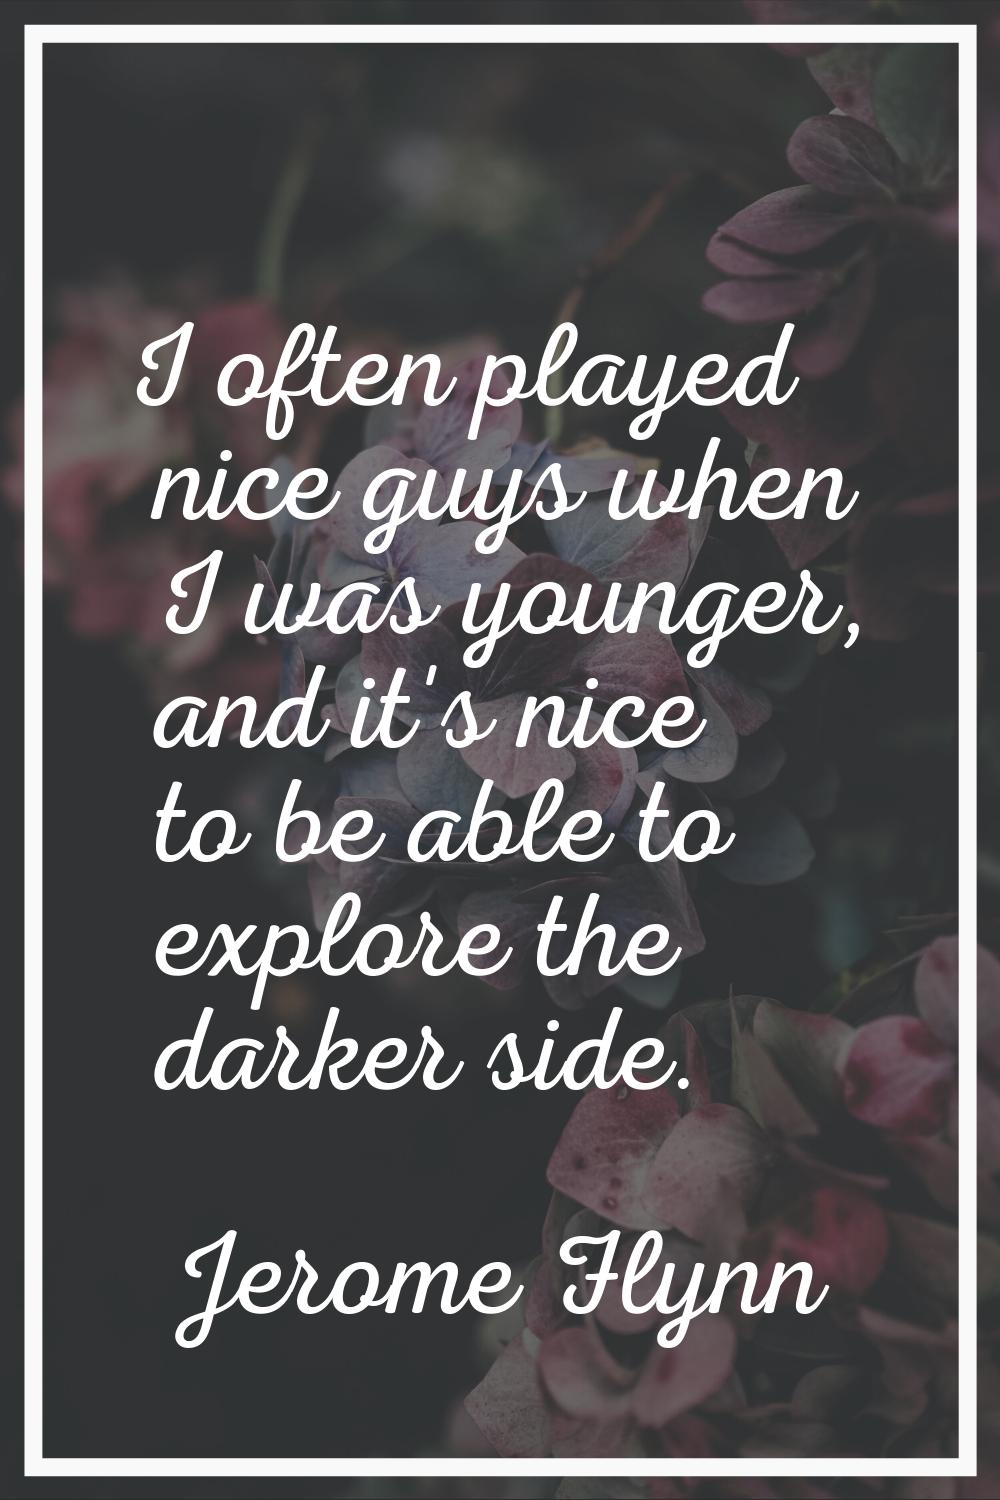 I often played nice guys when I was younger, and it's nice to be able to explore the darker side.